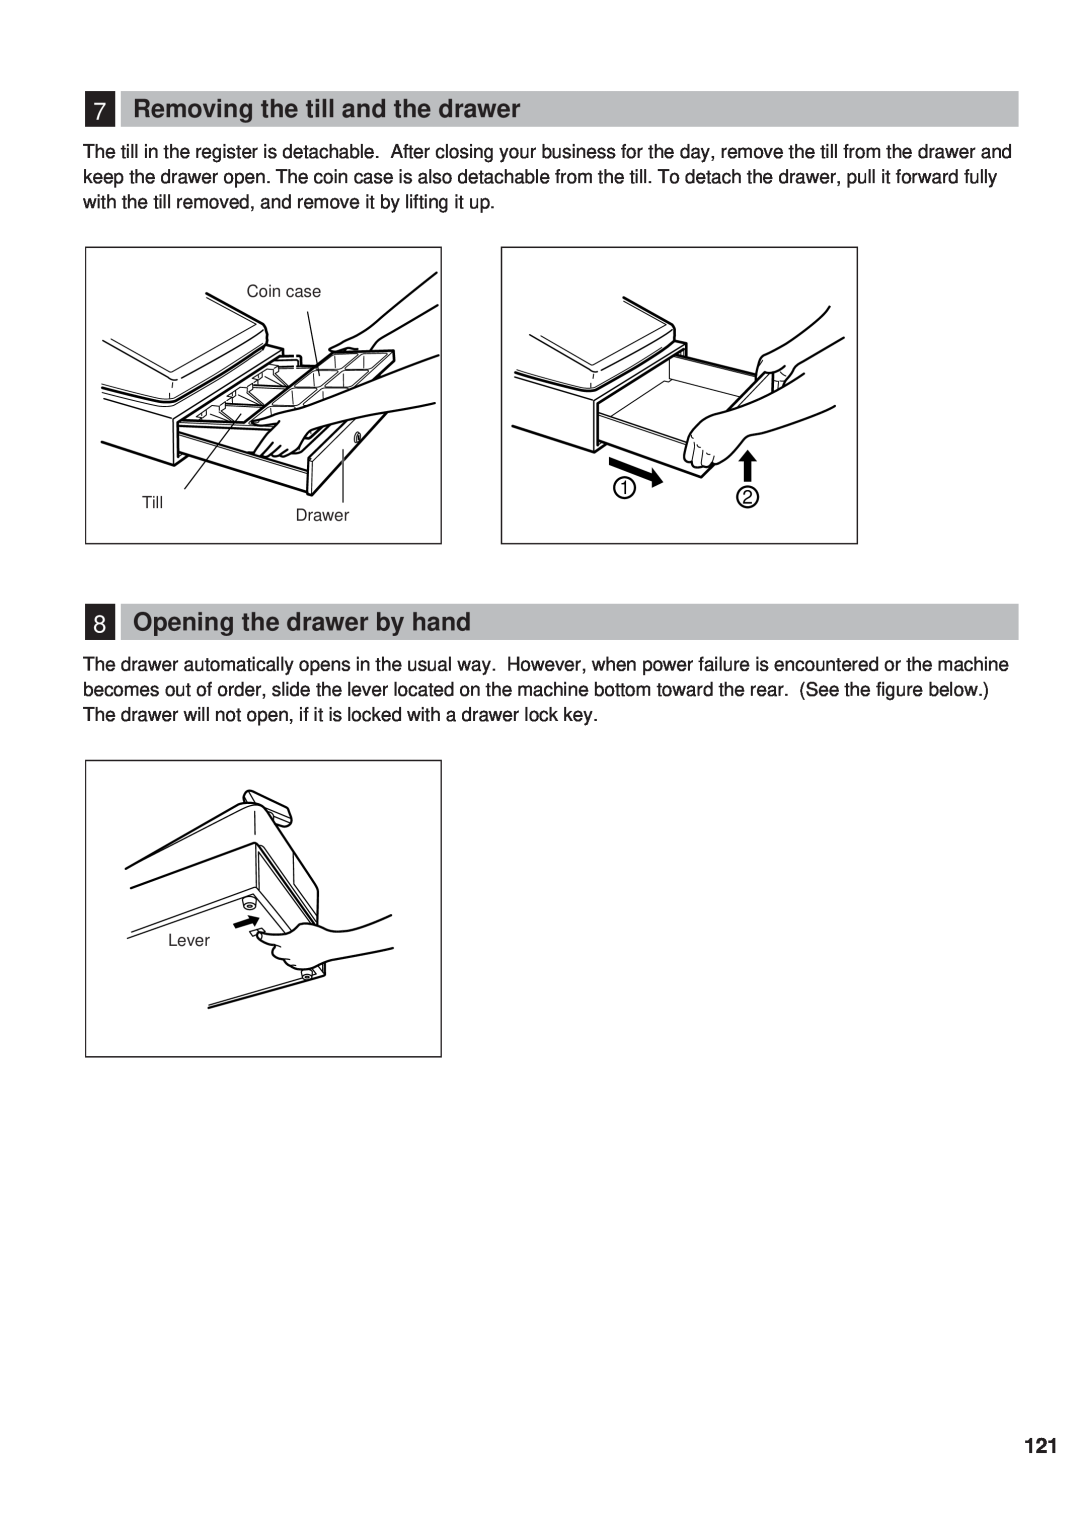 Sharp ER-A450 instruction manual Removing the till and the drawer, Opening the drawer by hand, Coin case 